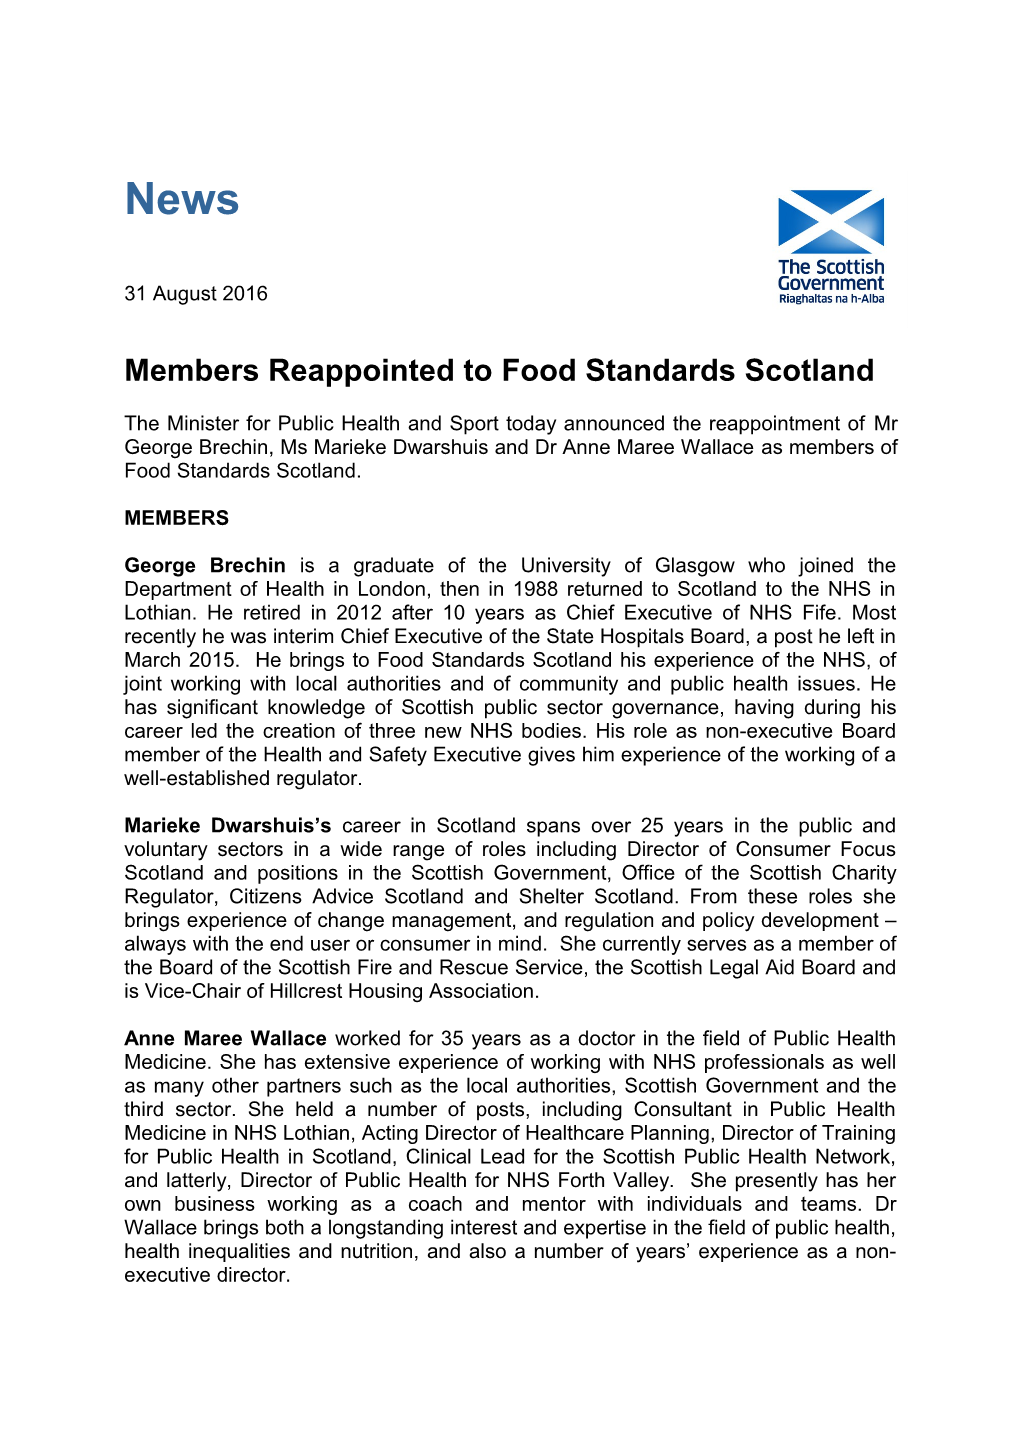 Members Reappointed to Food Standards Scotland